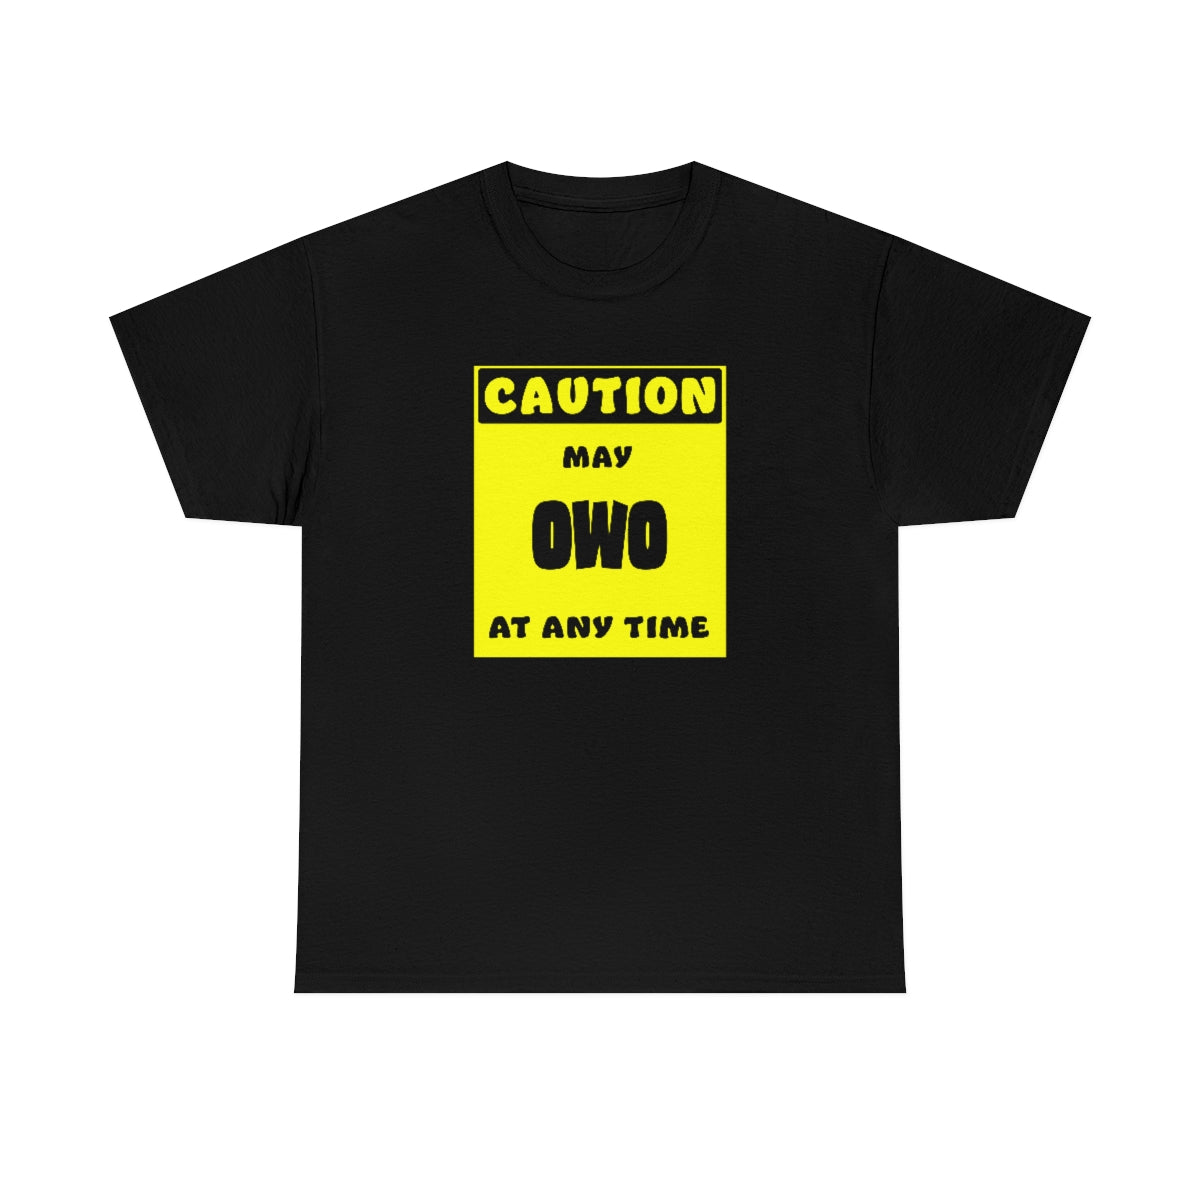 CAUTION! May OWO at any time! - T-Shirt T-Shirt AFLT-Whootorca Black S 